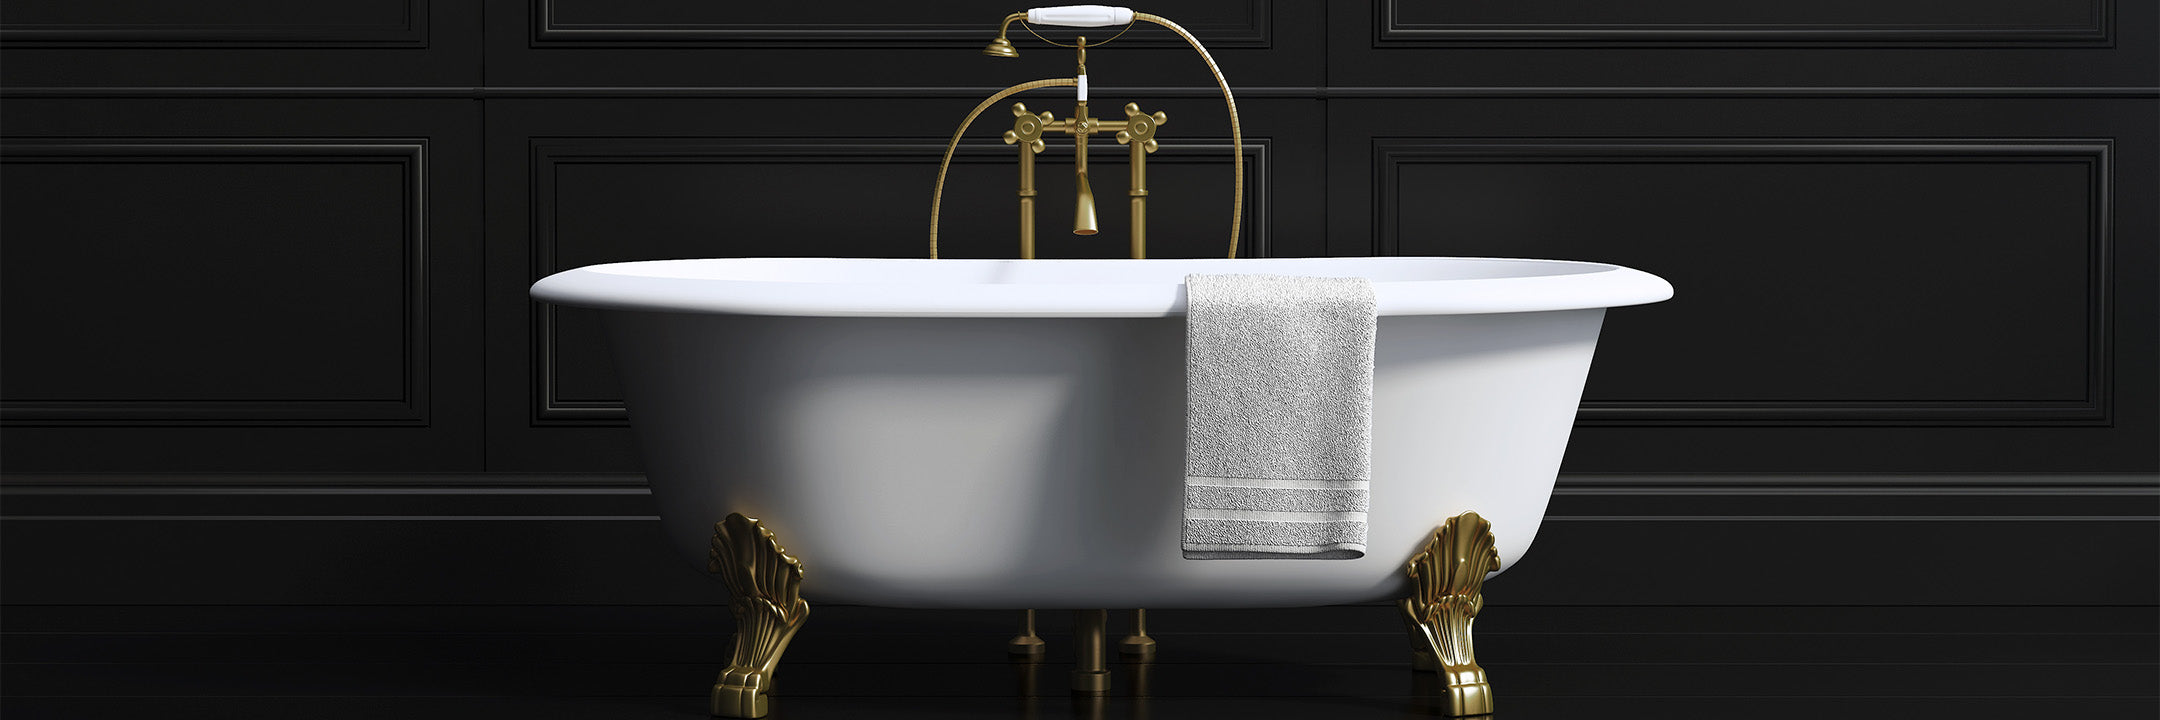 America's Specialists for Luxury Bathtubs, Vanities and Showers